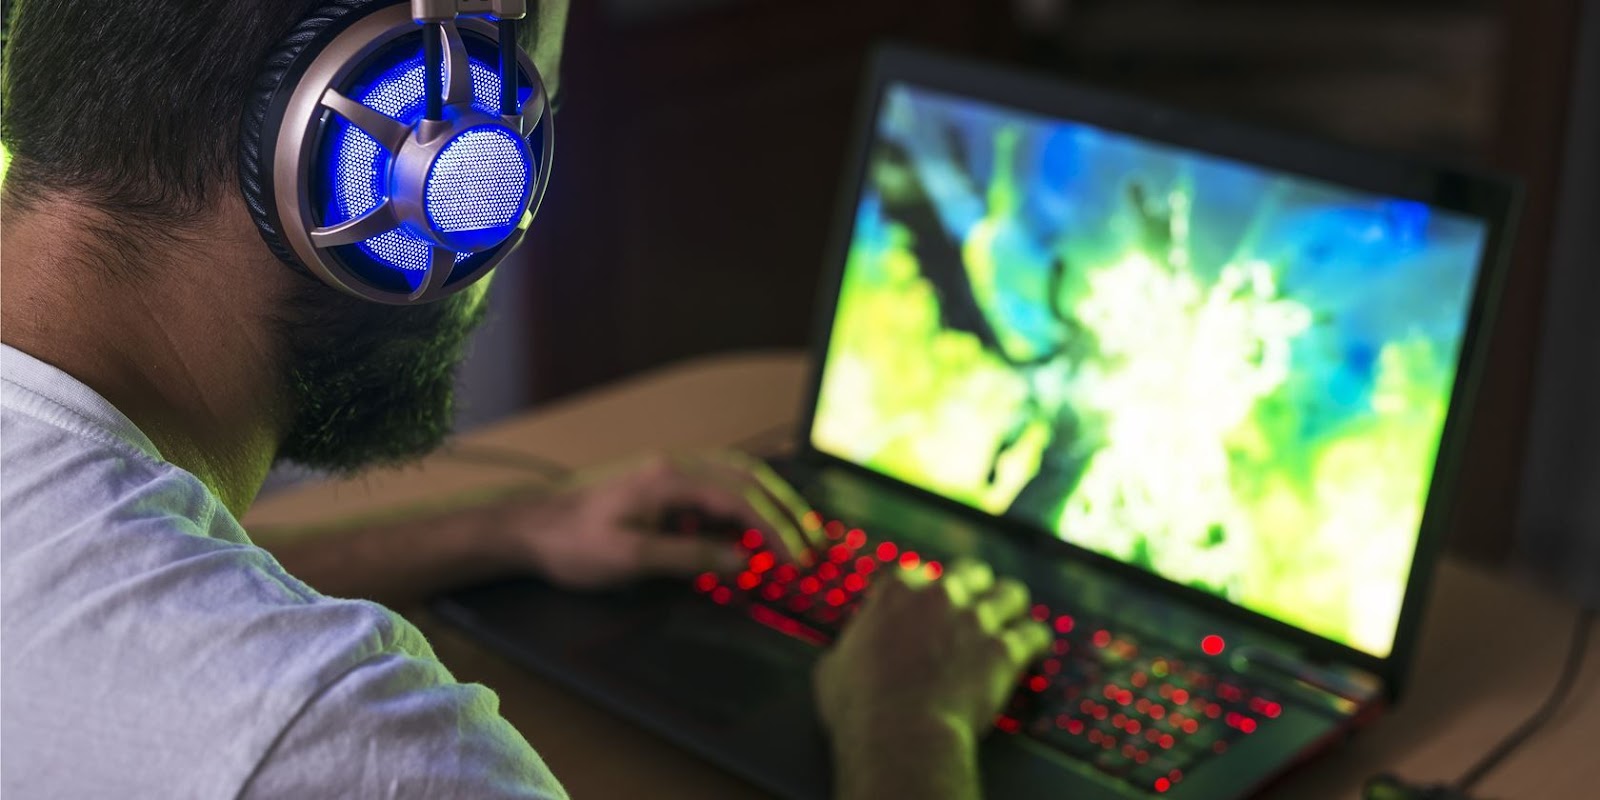 How To Playing Online Games Pro-Style